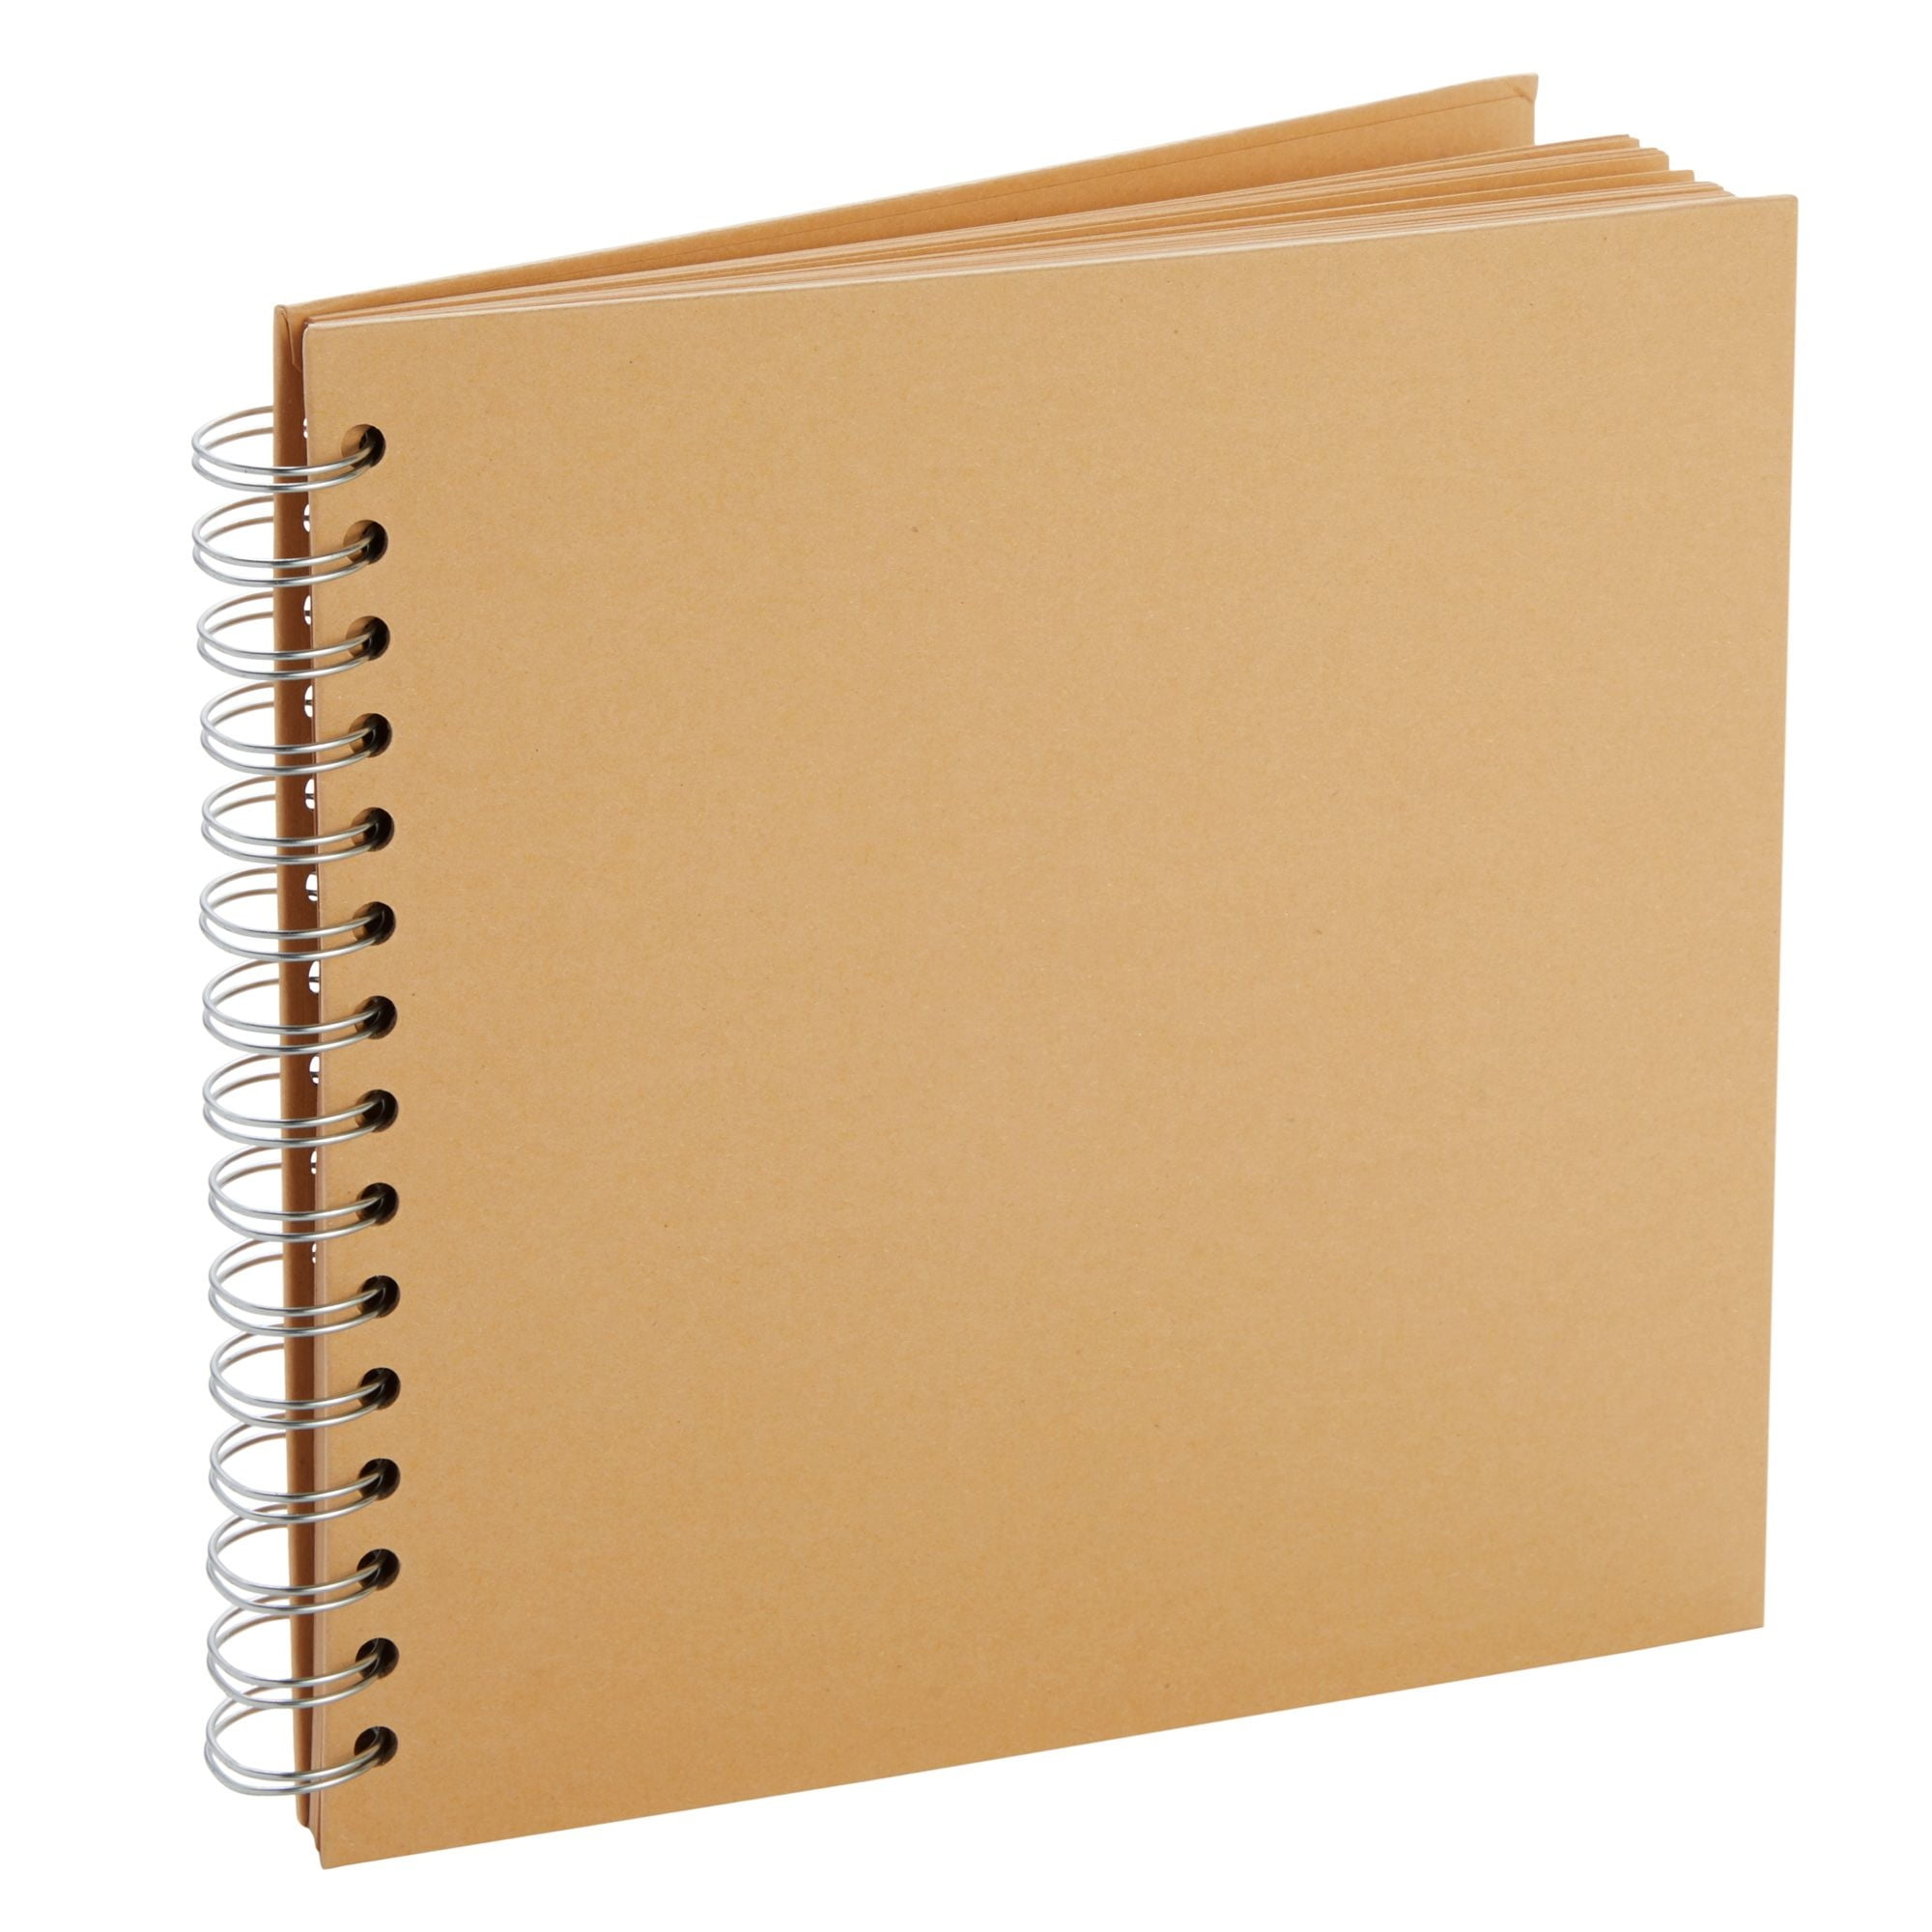 80 Pages Hardcover Kraft Scrapbook Albums, Blank Journal for Scrapbooking ( 8x8 Inches) 